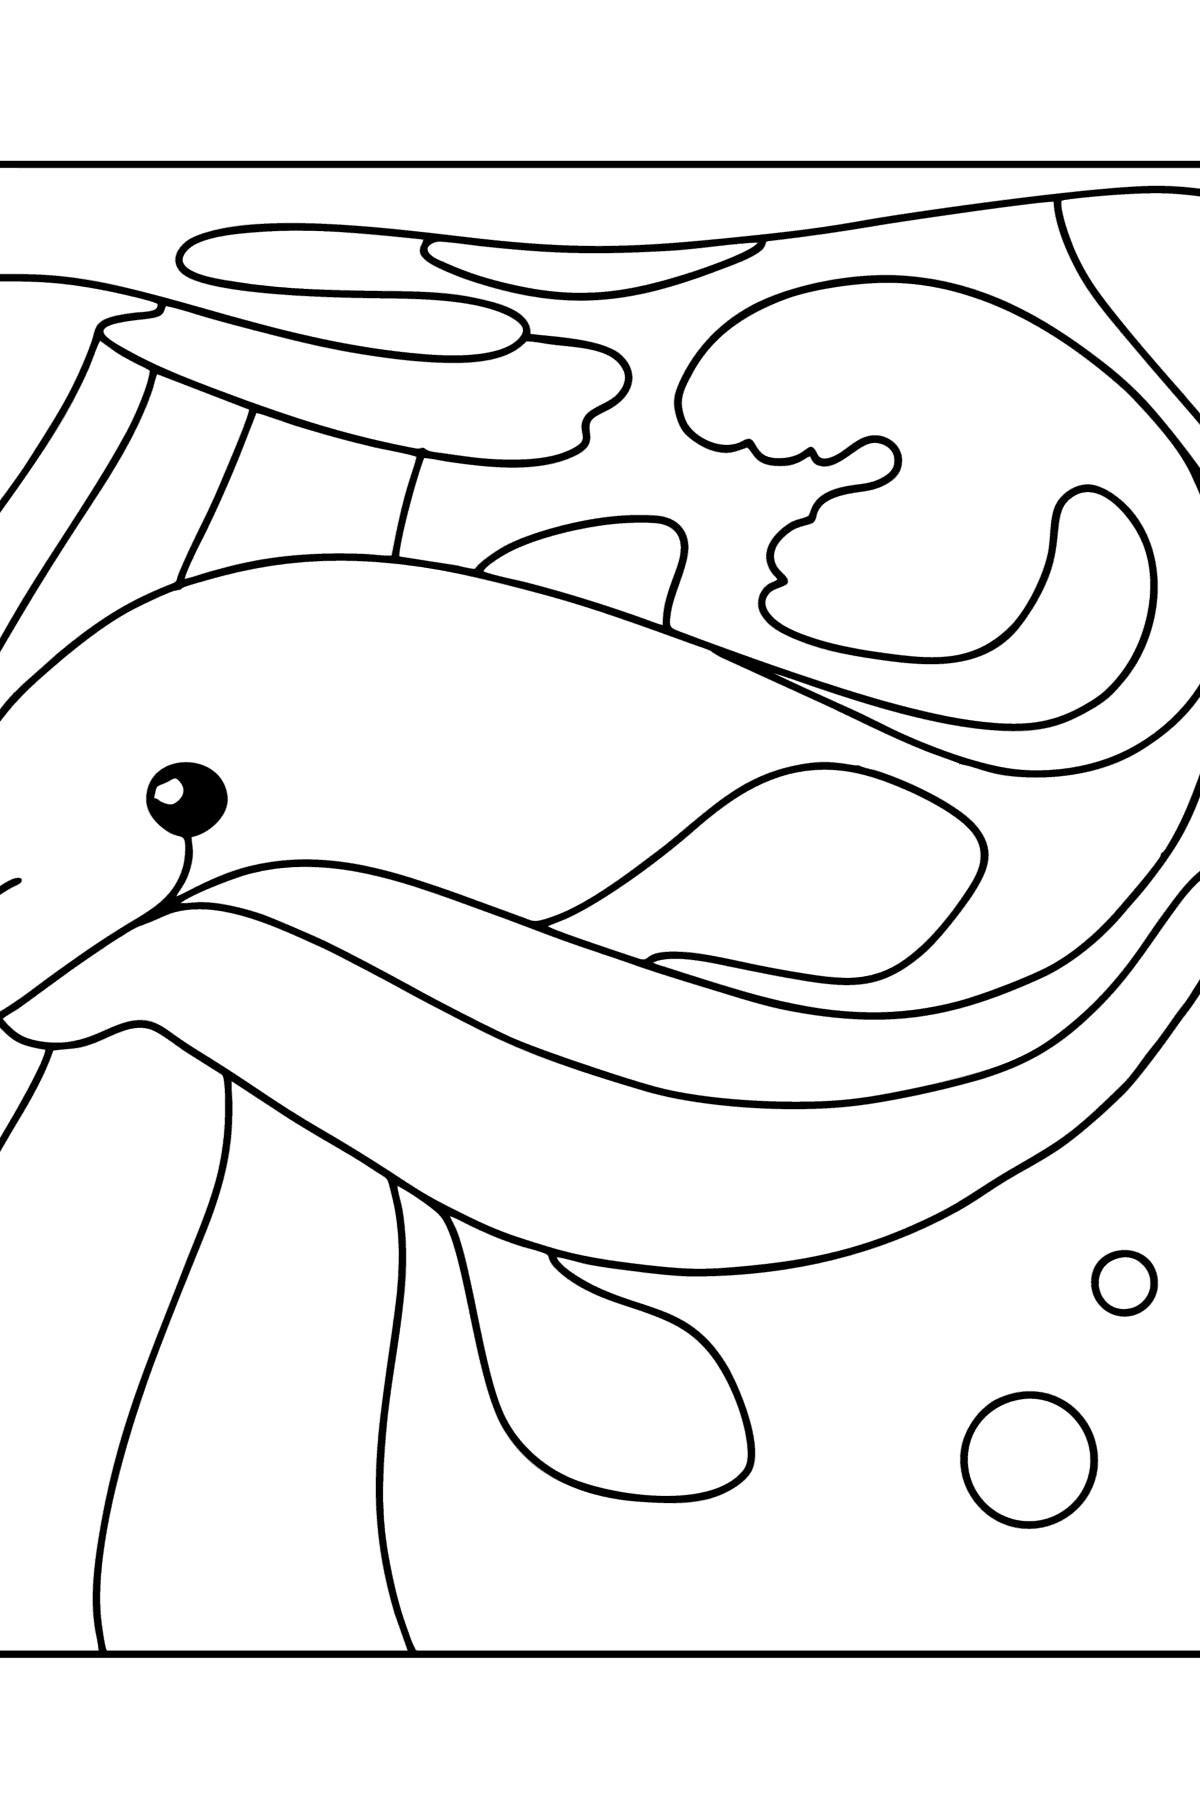 Dolphin in Water coloring page - Coloring Pages for Kids